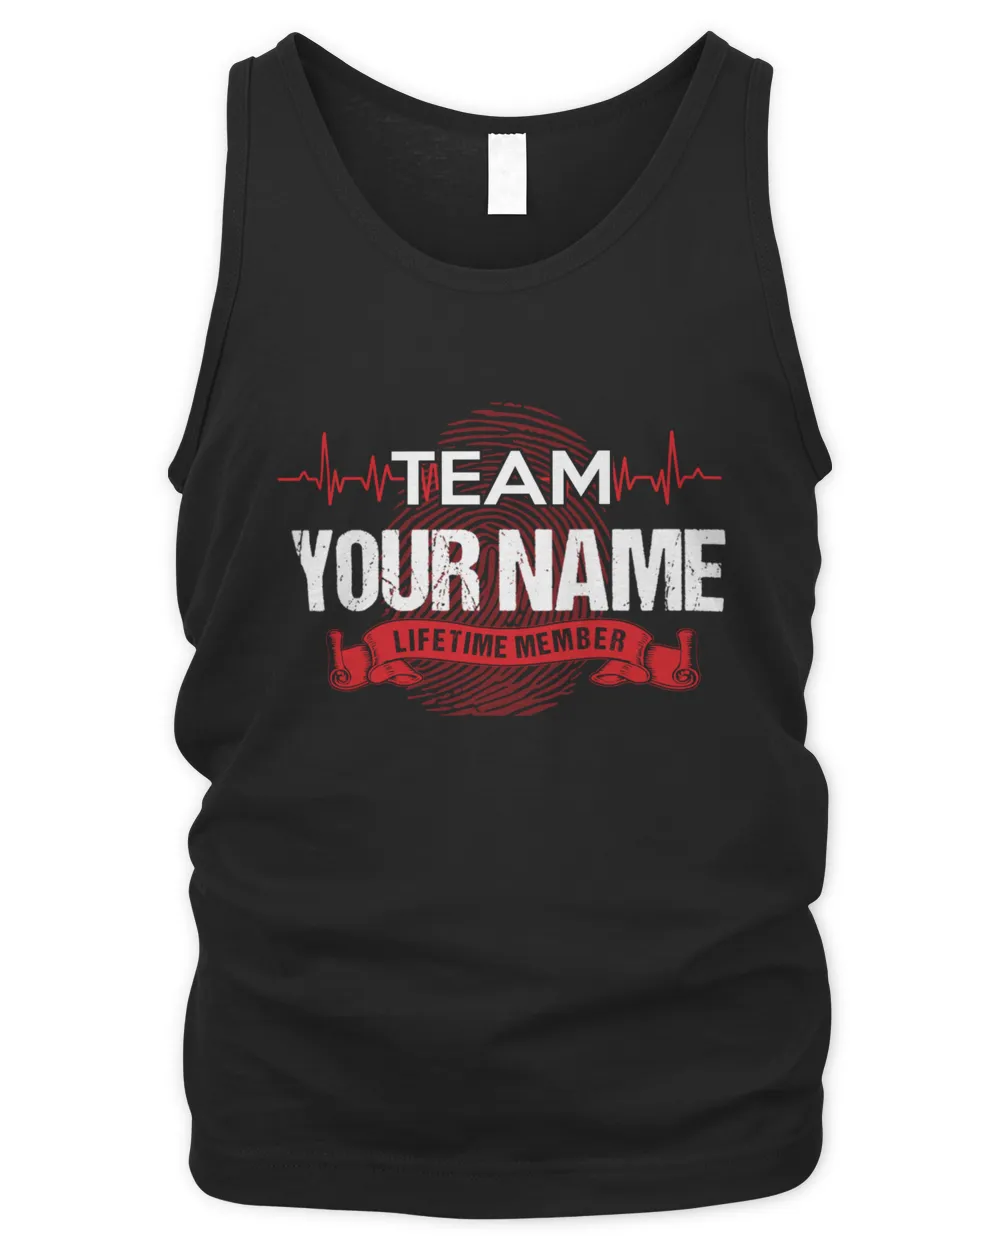 Team YOUR NAME .Life Time member